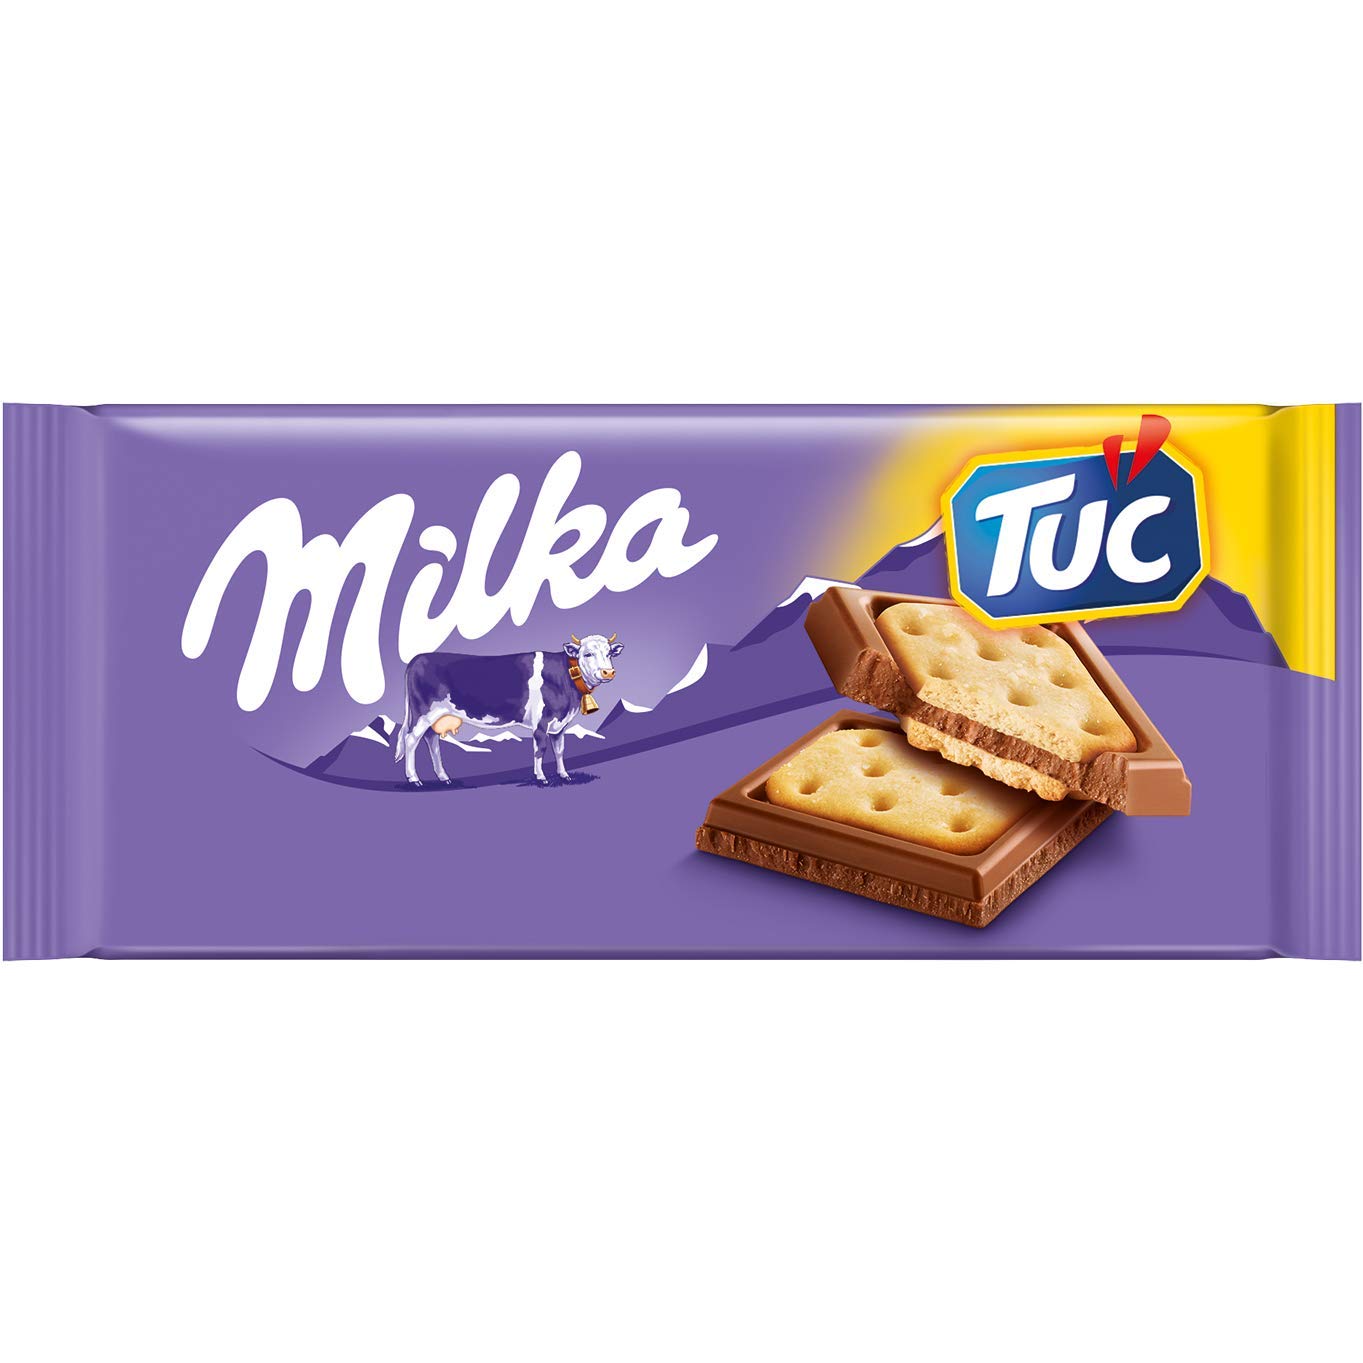 Milka Chocolate and Salted TUC Crackers Bar, 3.07oz (Imported from